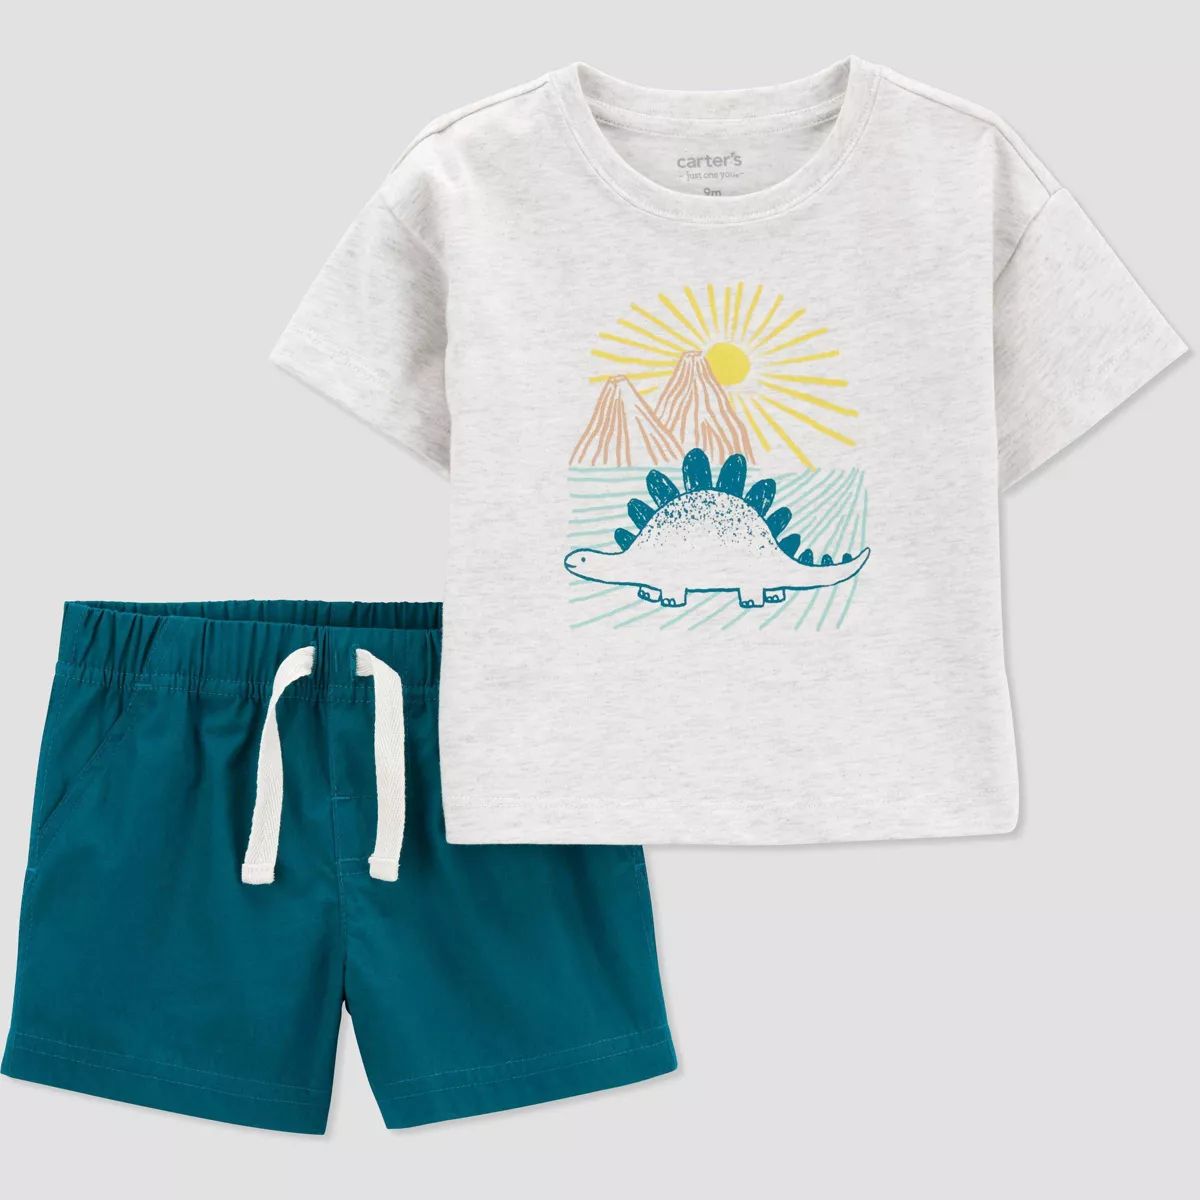 Carter's Just One You® Baby Dino Top & Bottom Set - Gray/Green | Target